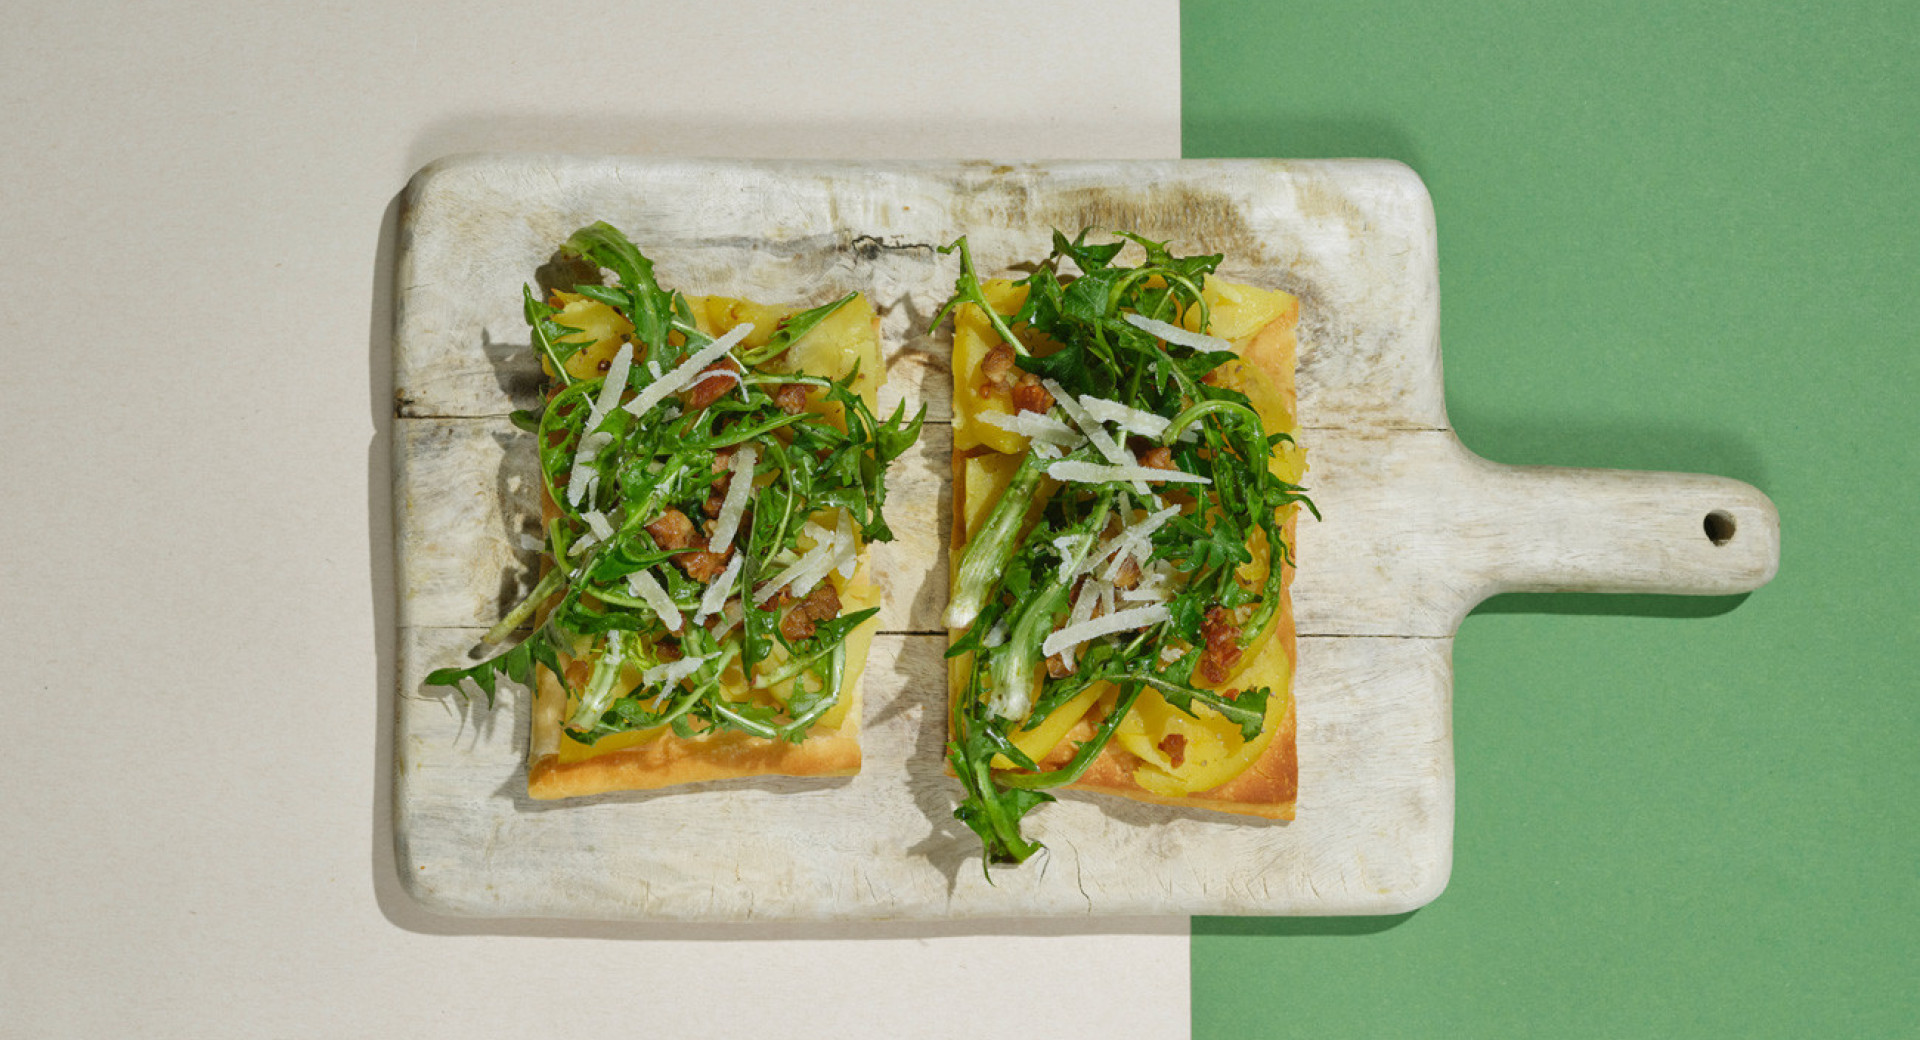 A light wooden board on a beige and green base. On the board, two slices of bread with arugula and grated cheese.